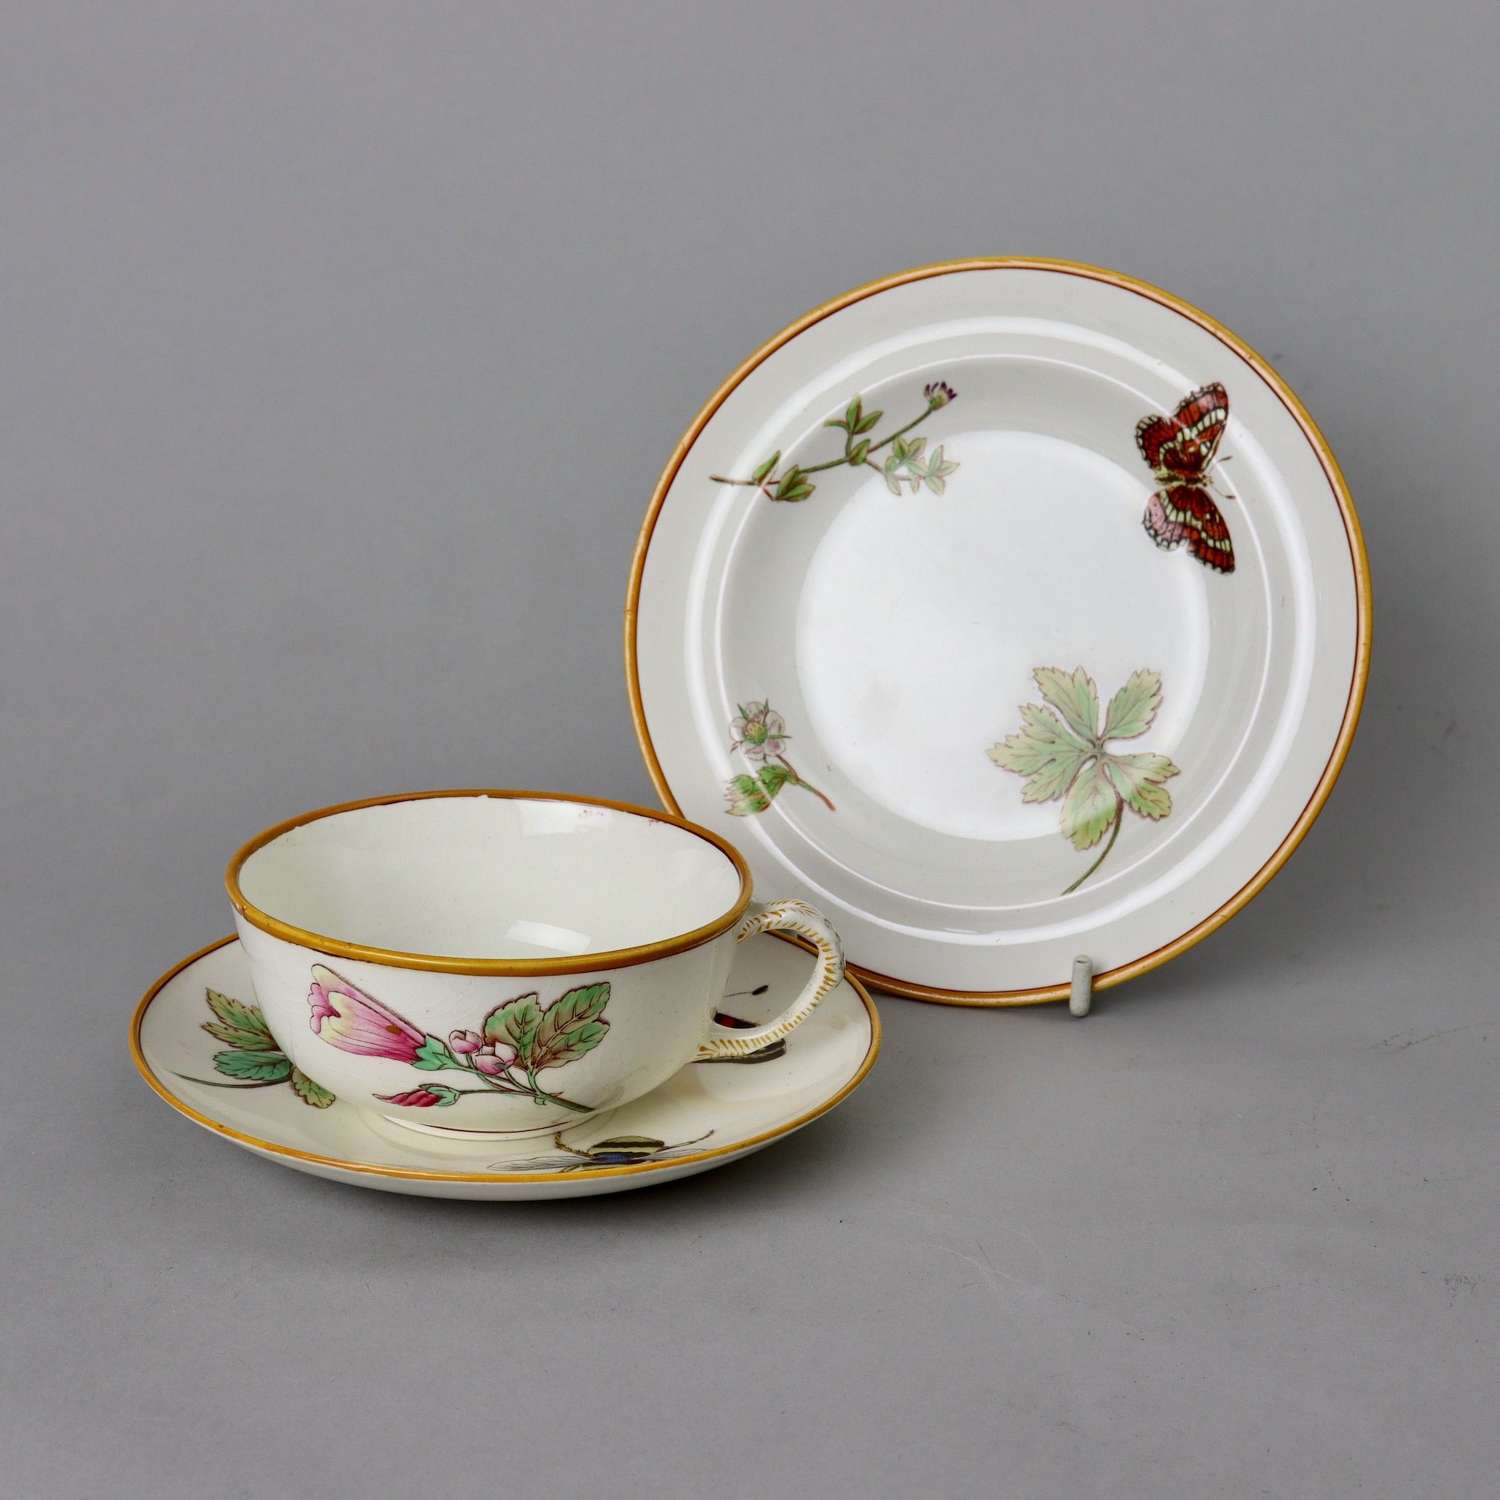 Wedgwood Trio decorated with Butterflies, Flowers and Insects